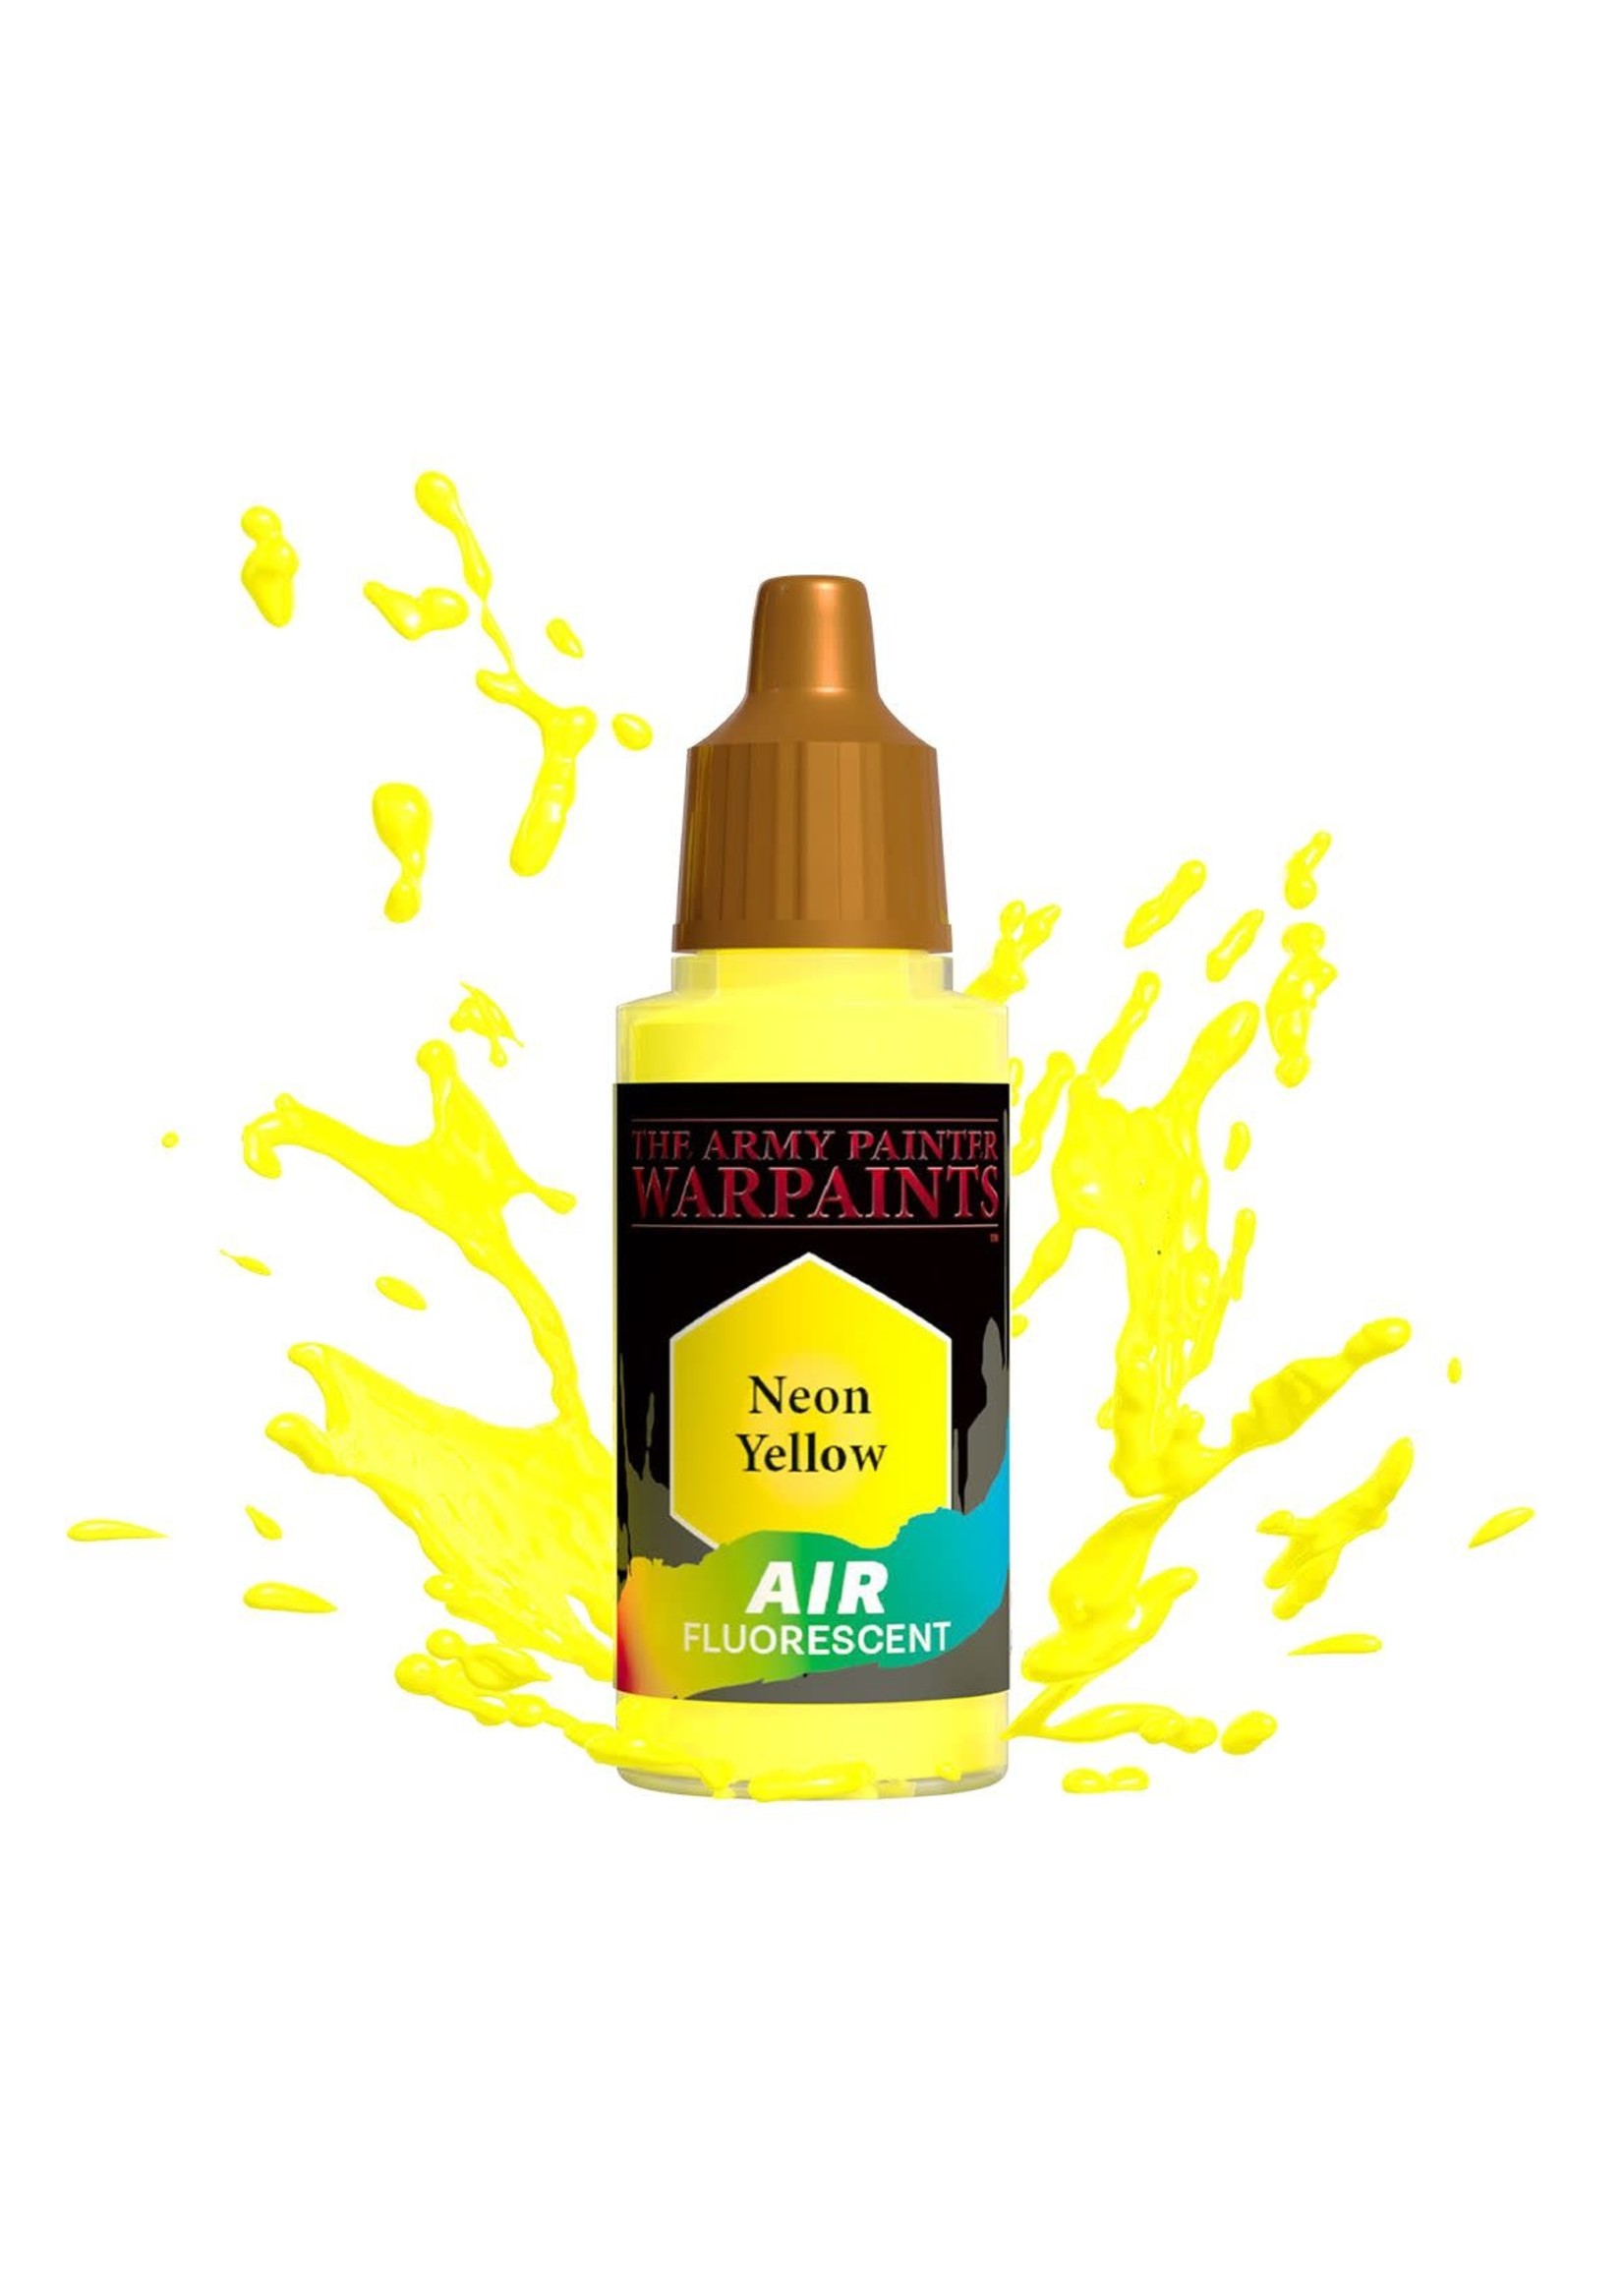 The Army Painter Air Fluorescent: Neon Yellow - The Army Painter